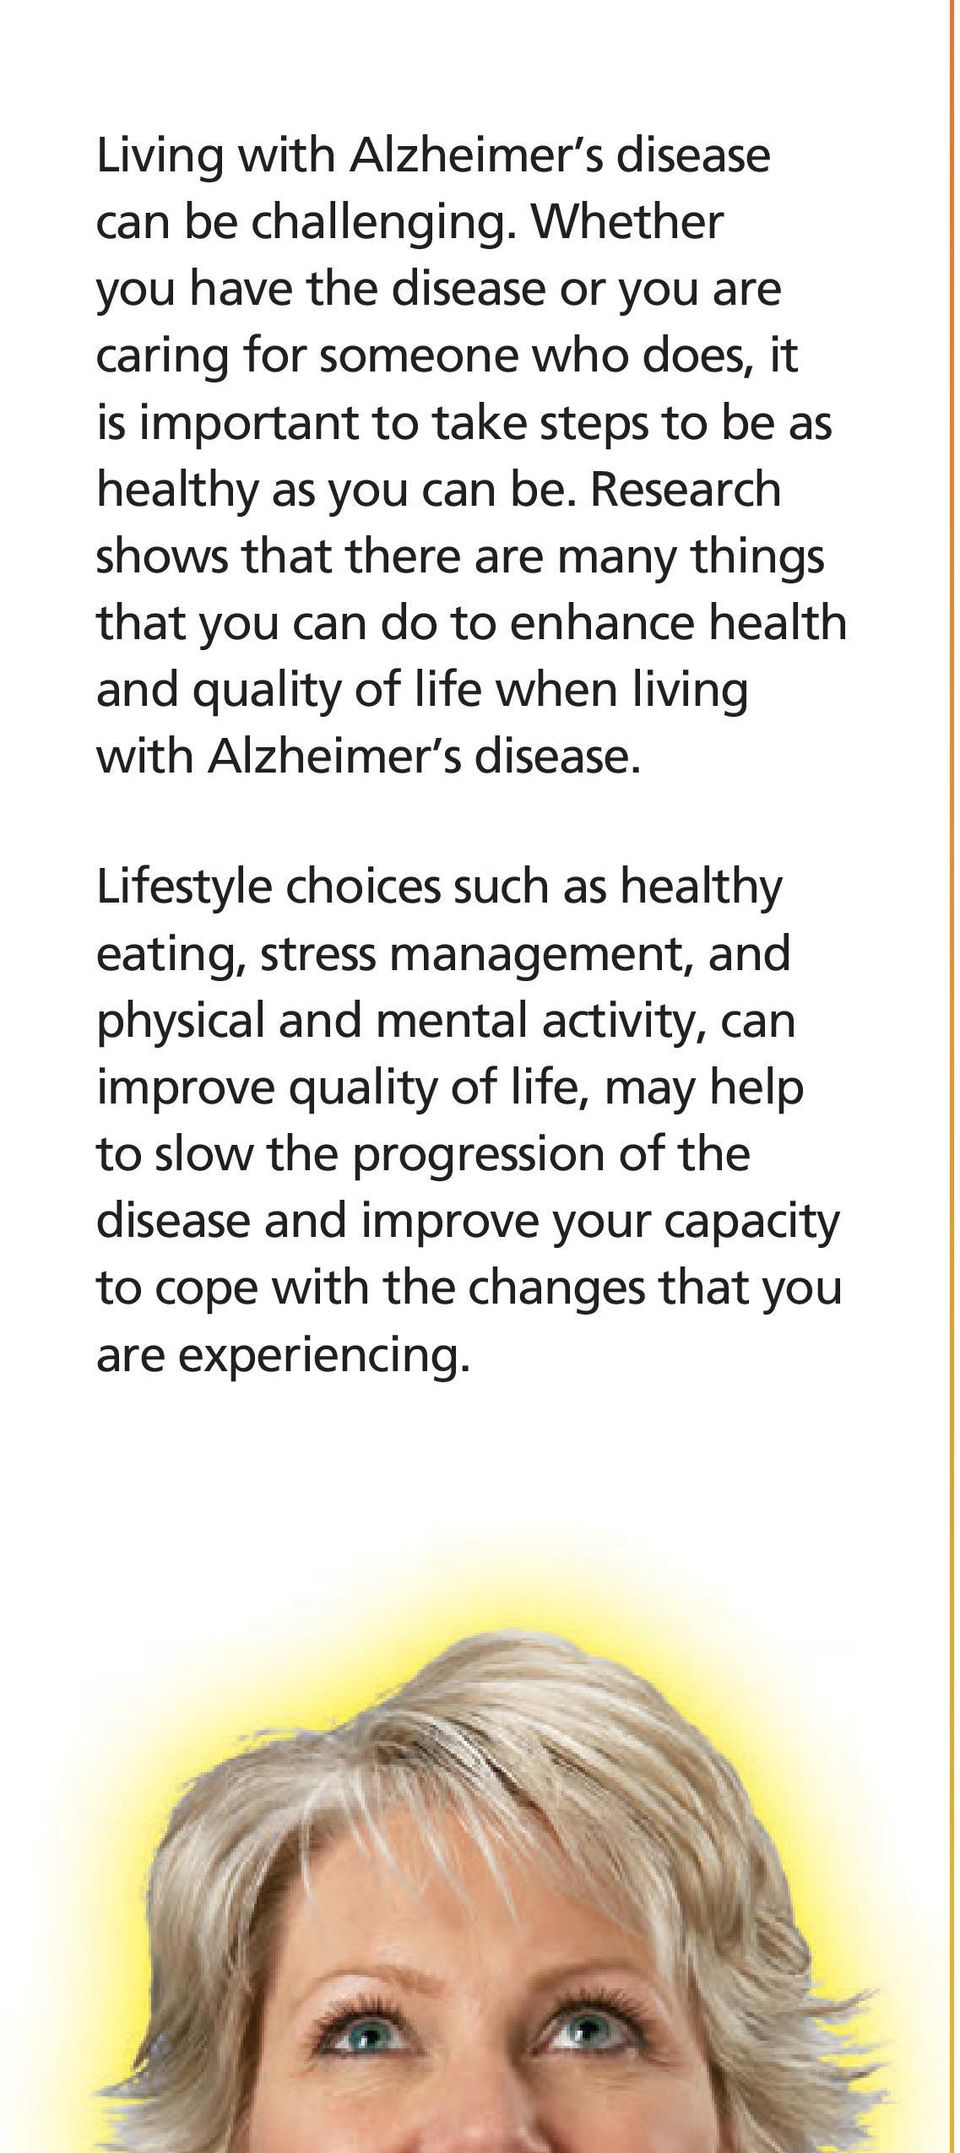 Research shows that there are many things that you can do to enhance health and quality of life when living with Alzheimer s disease.